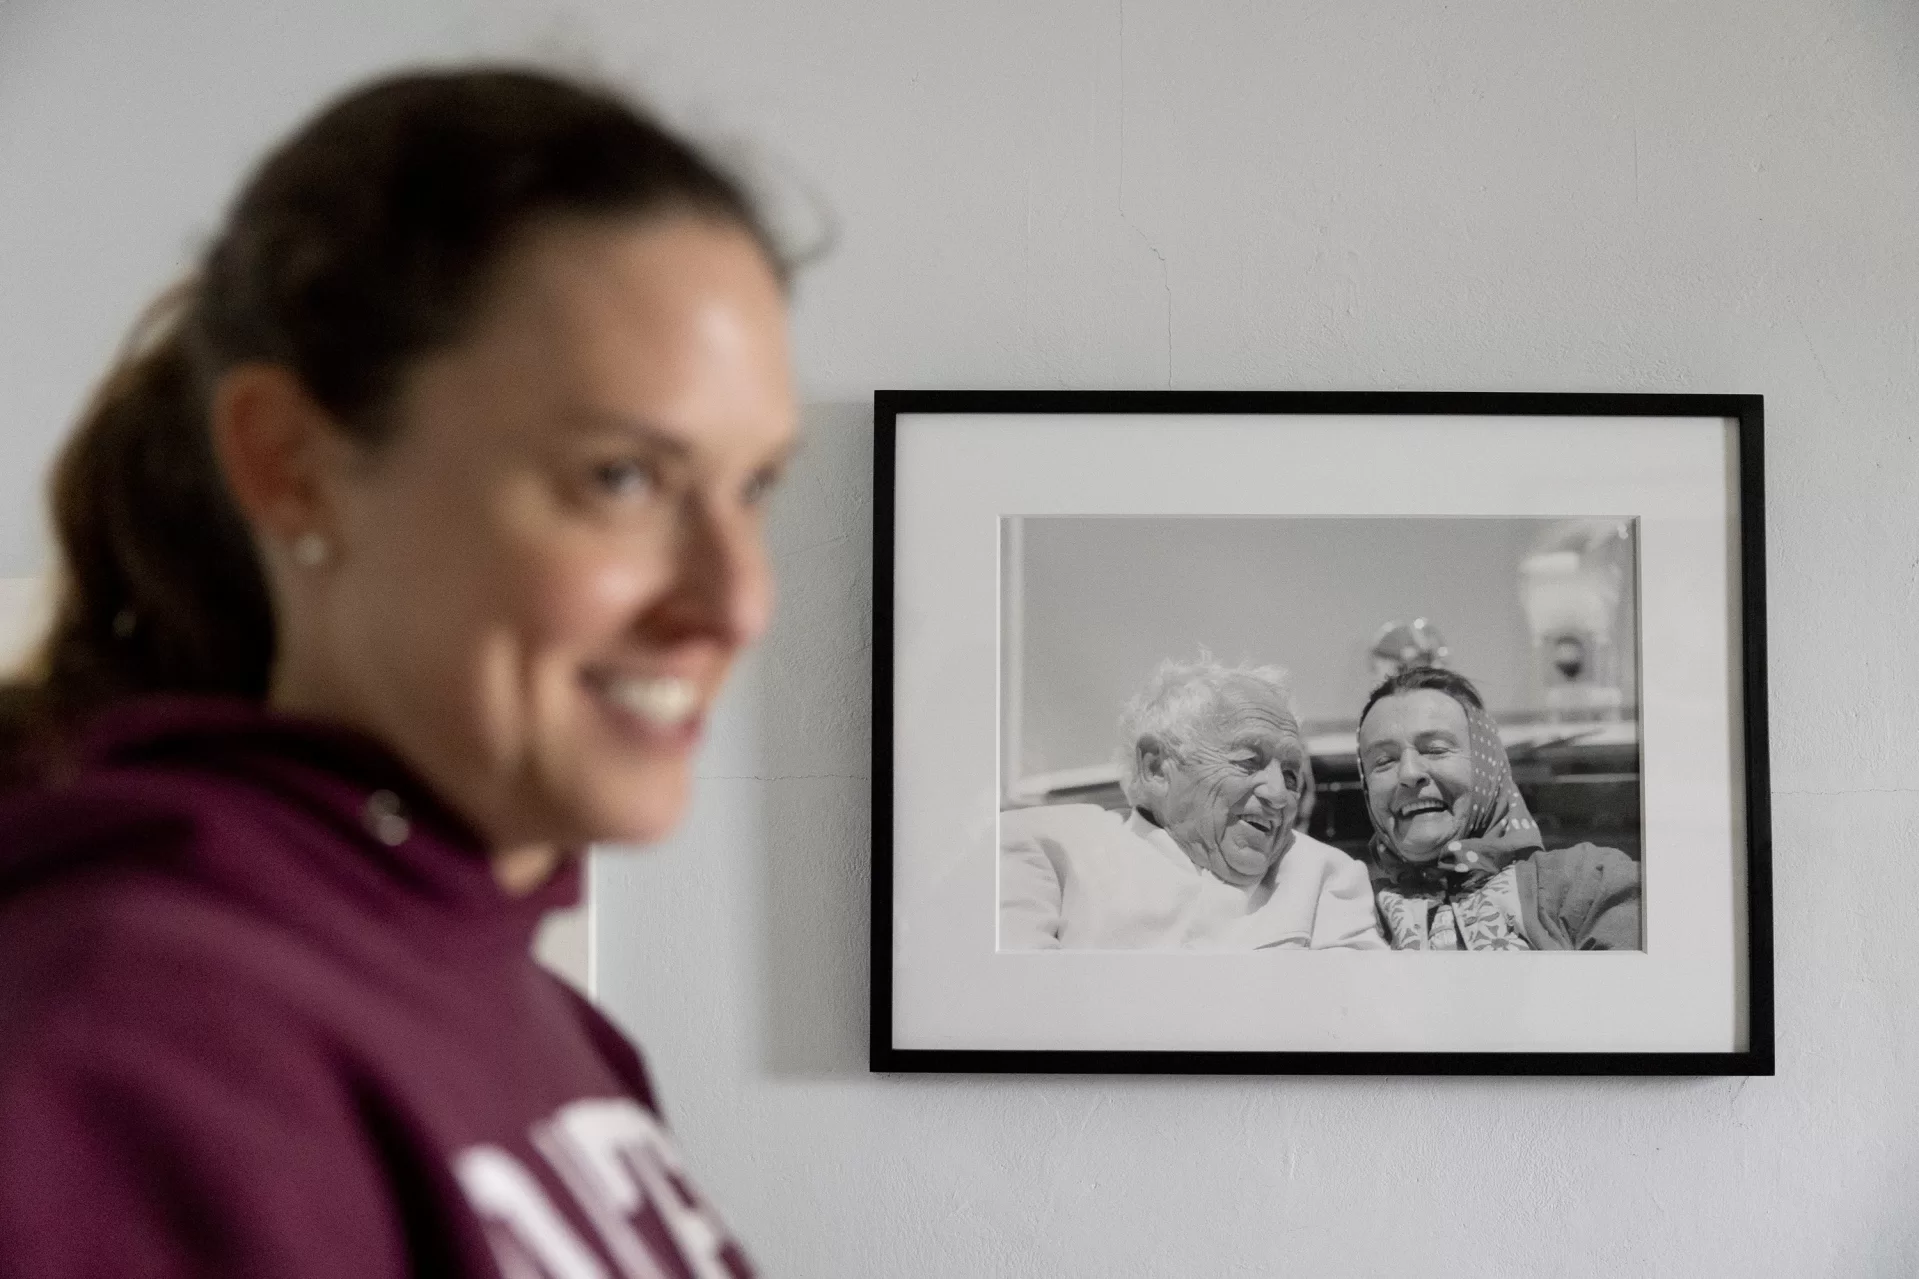 Victoria Wyeth ‘01 smiles at students in front of a photograph she made of  her grandparents, Andrew and Betsy Wyeth that hangs in her Cushing, Maine, home. (Phyllis Graber Jensen/Bates College)